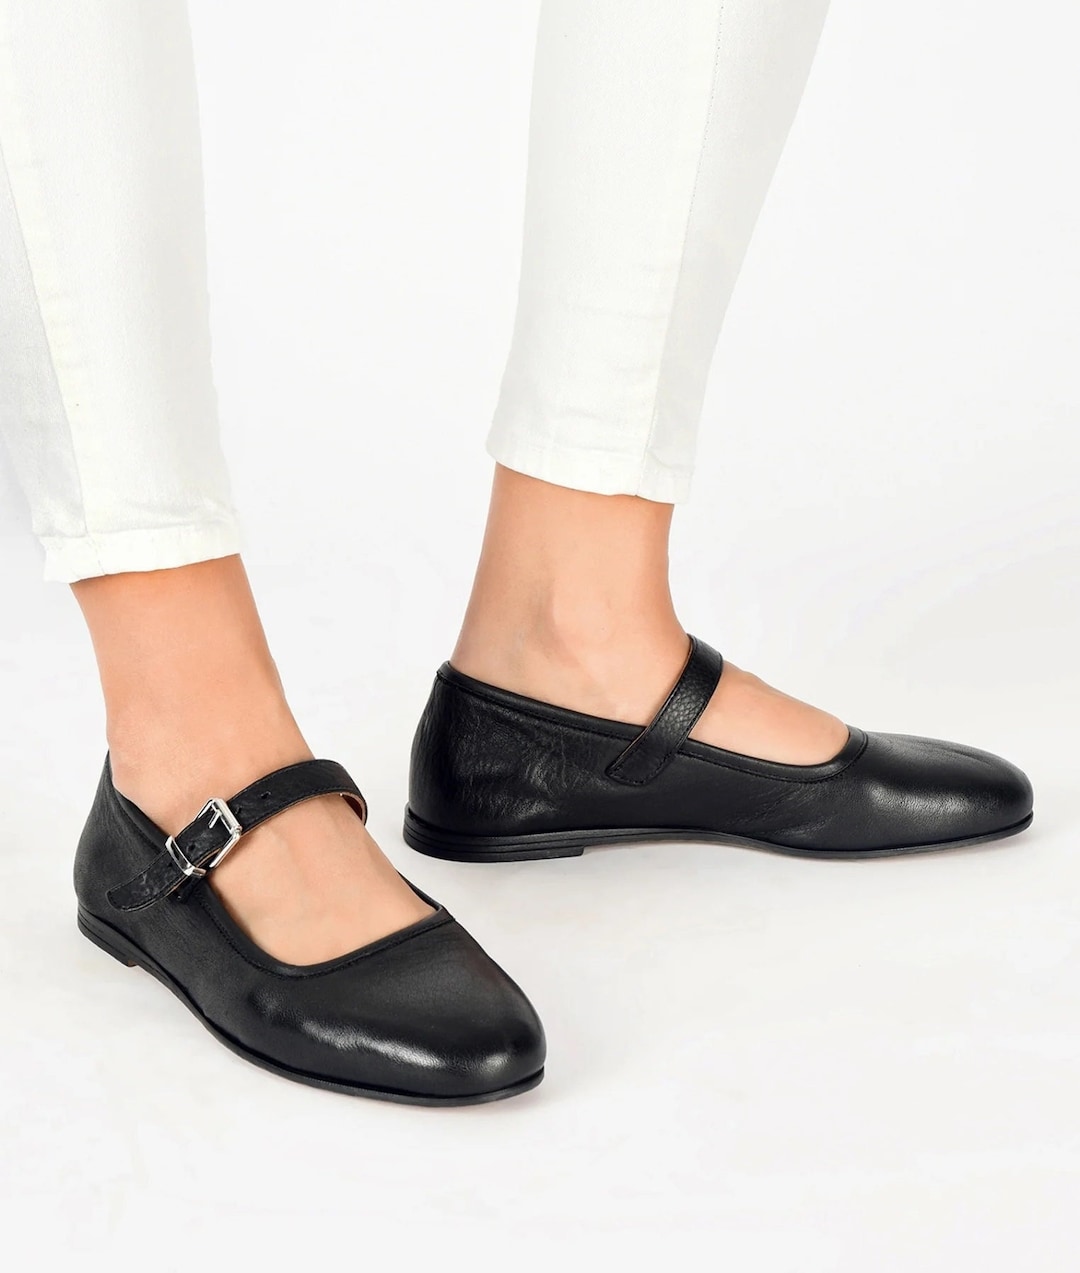 Ballerinas Leather Black , Ankle Strap Ballet Pumps, Leather Mary Jane ...